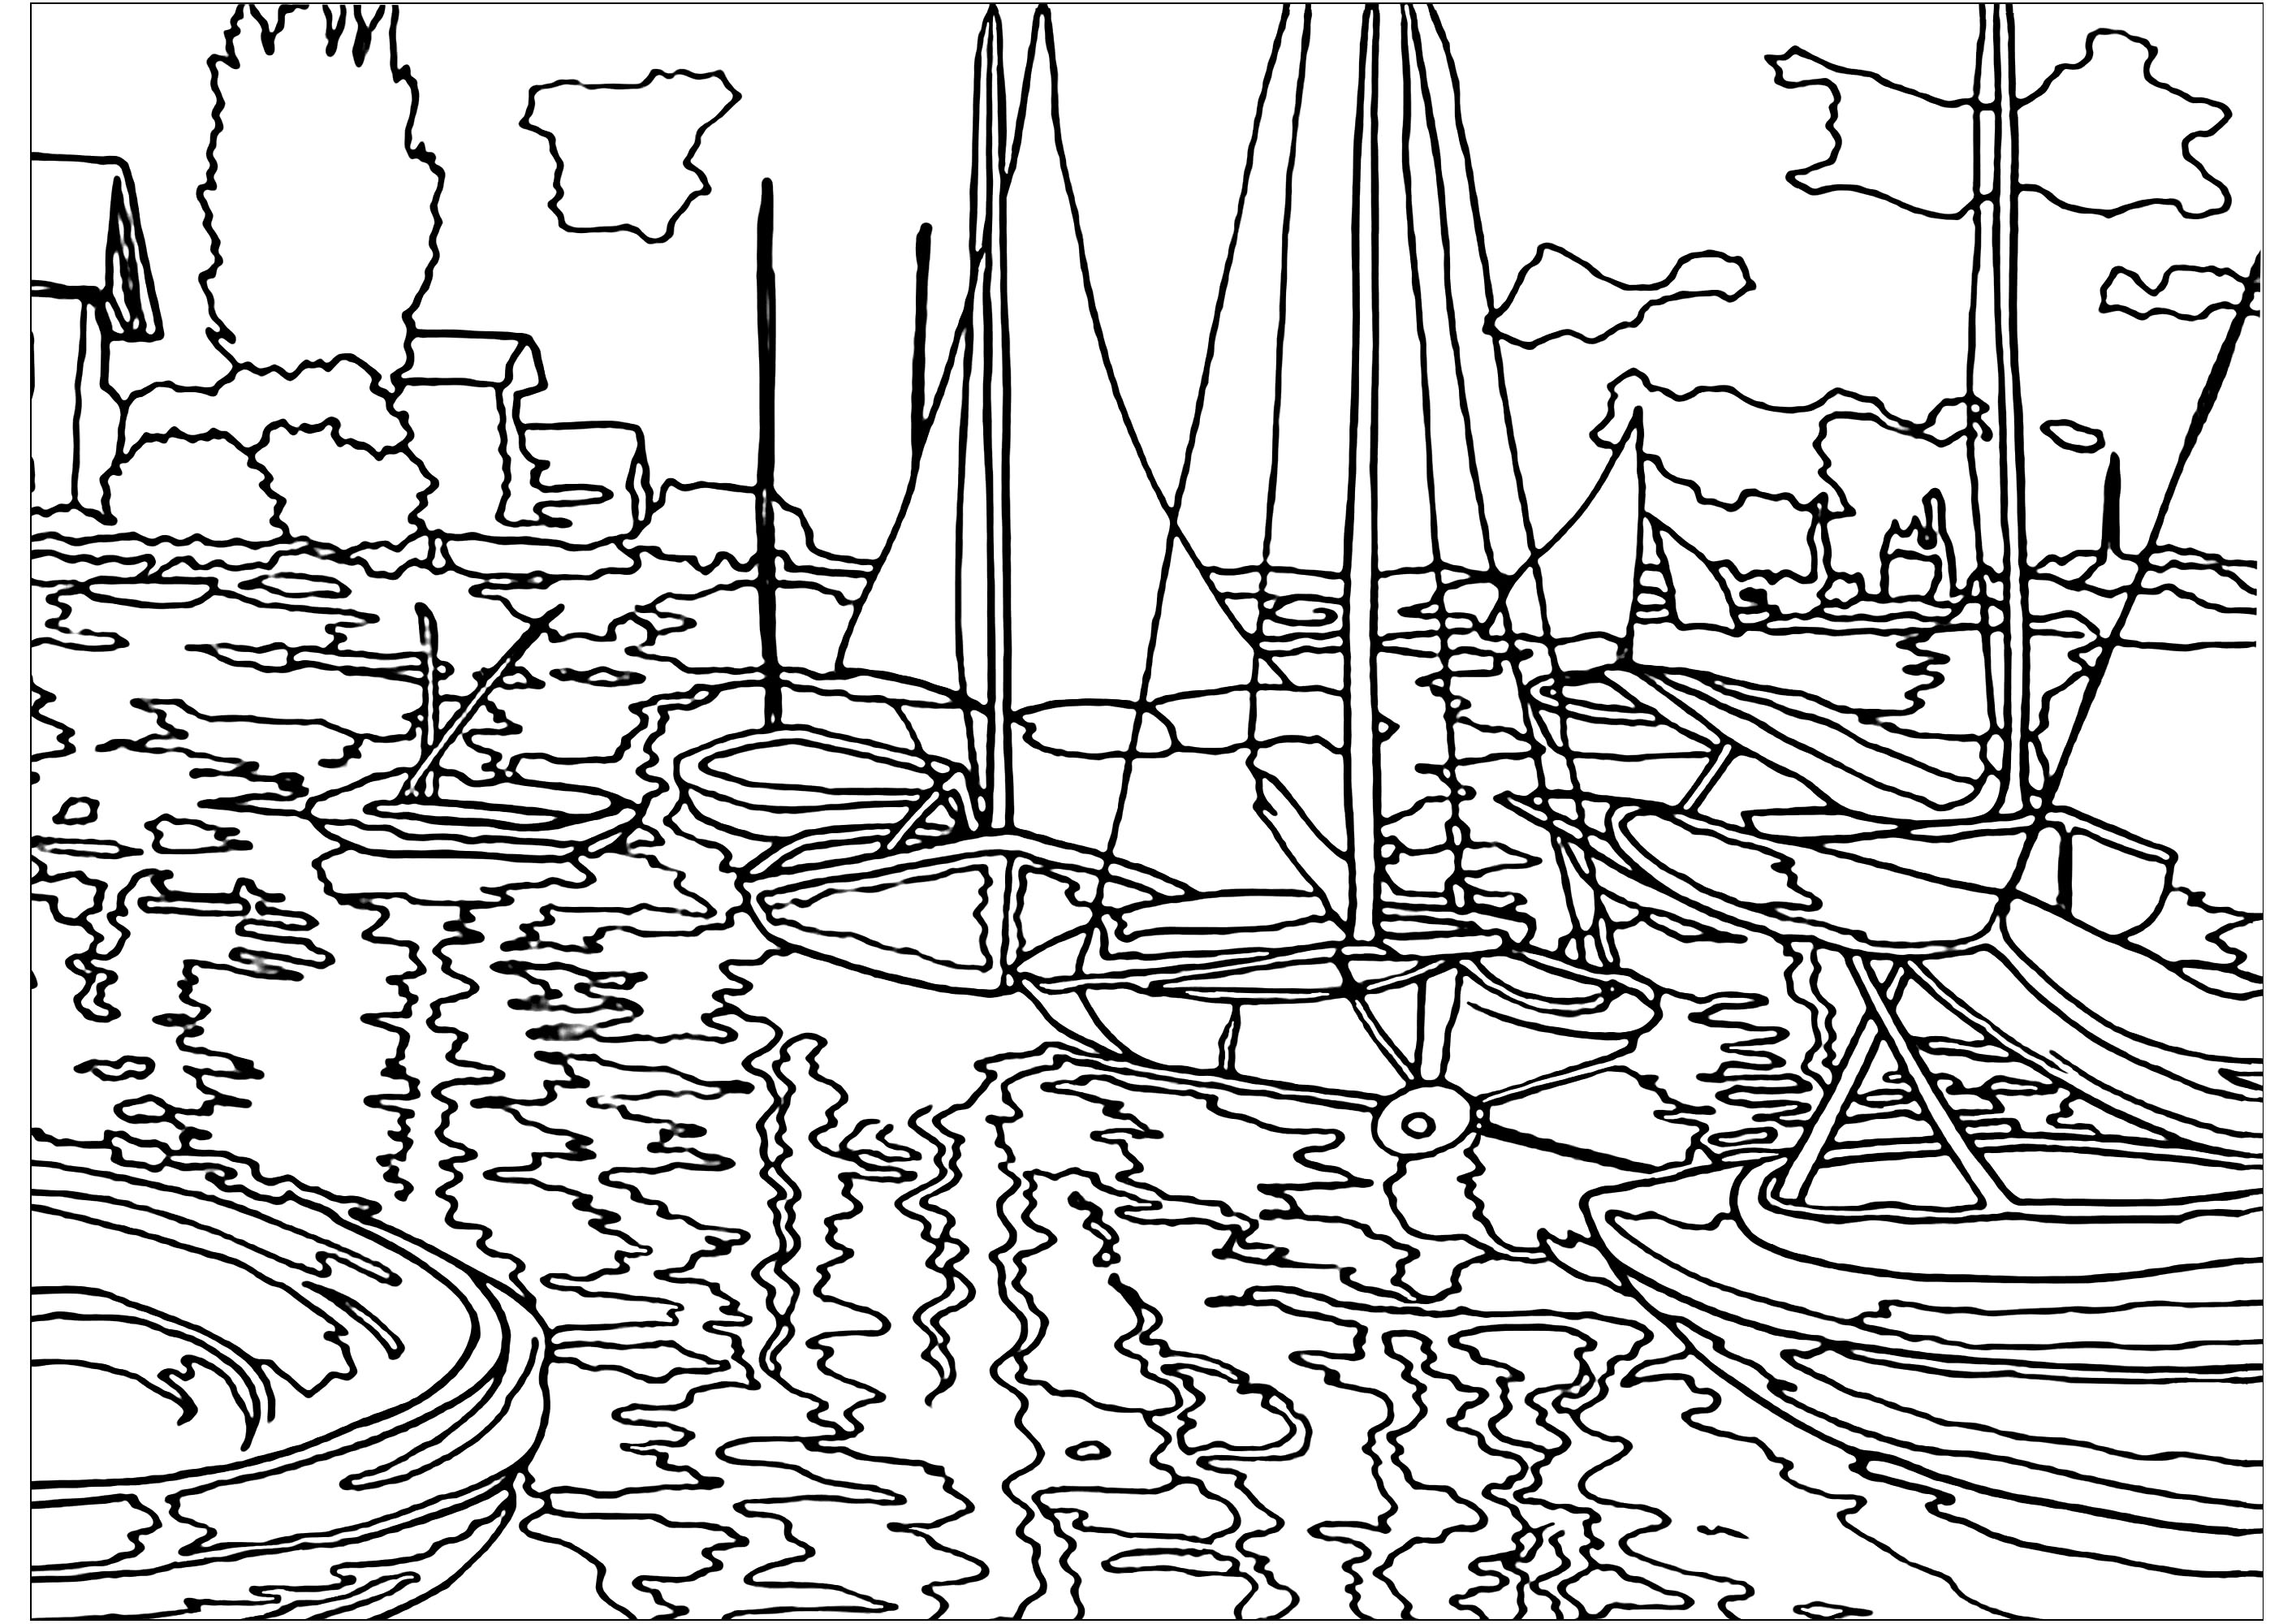 Coloring page created from a painting by Impressionist artist Claude Monet : Sailboats on the Seine at Petit - Gennevilliers, Artist : Art. Isabelle